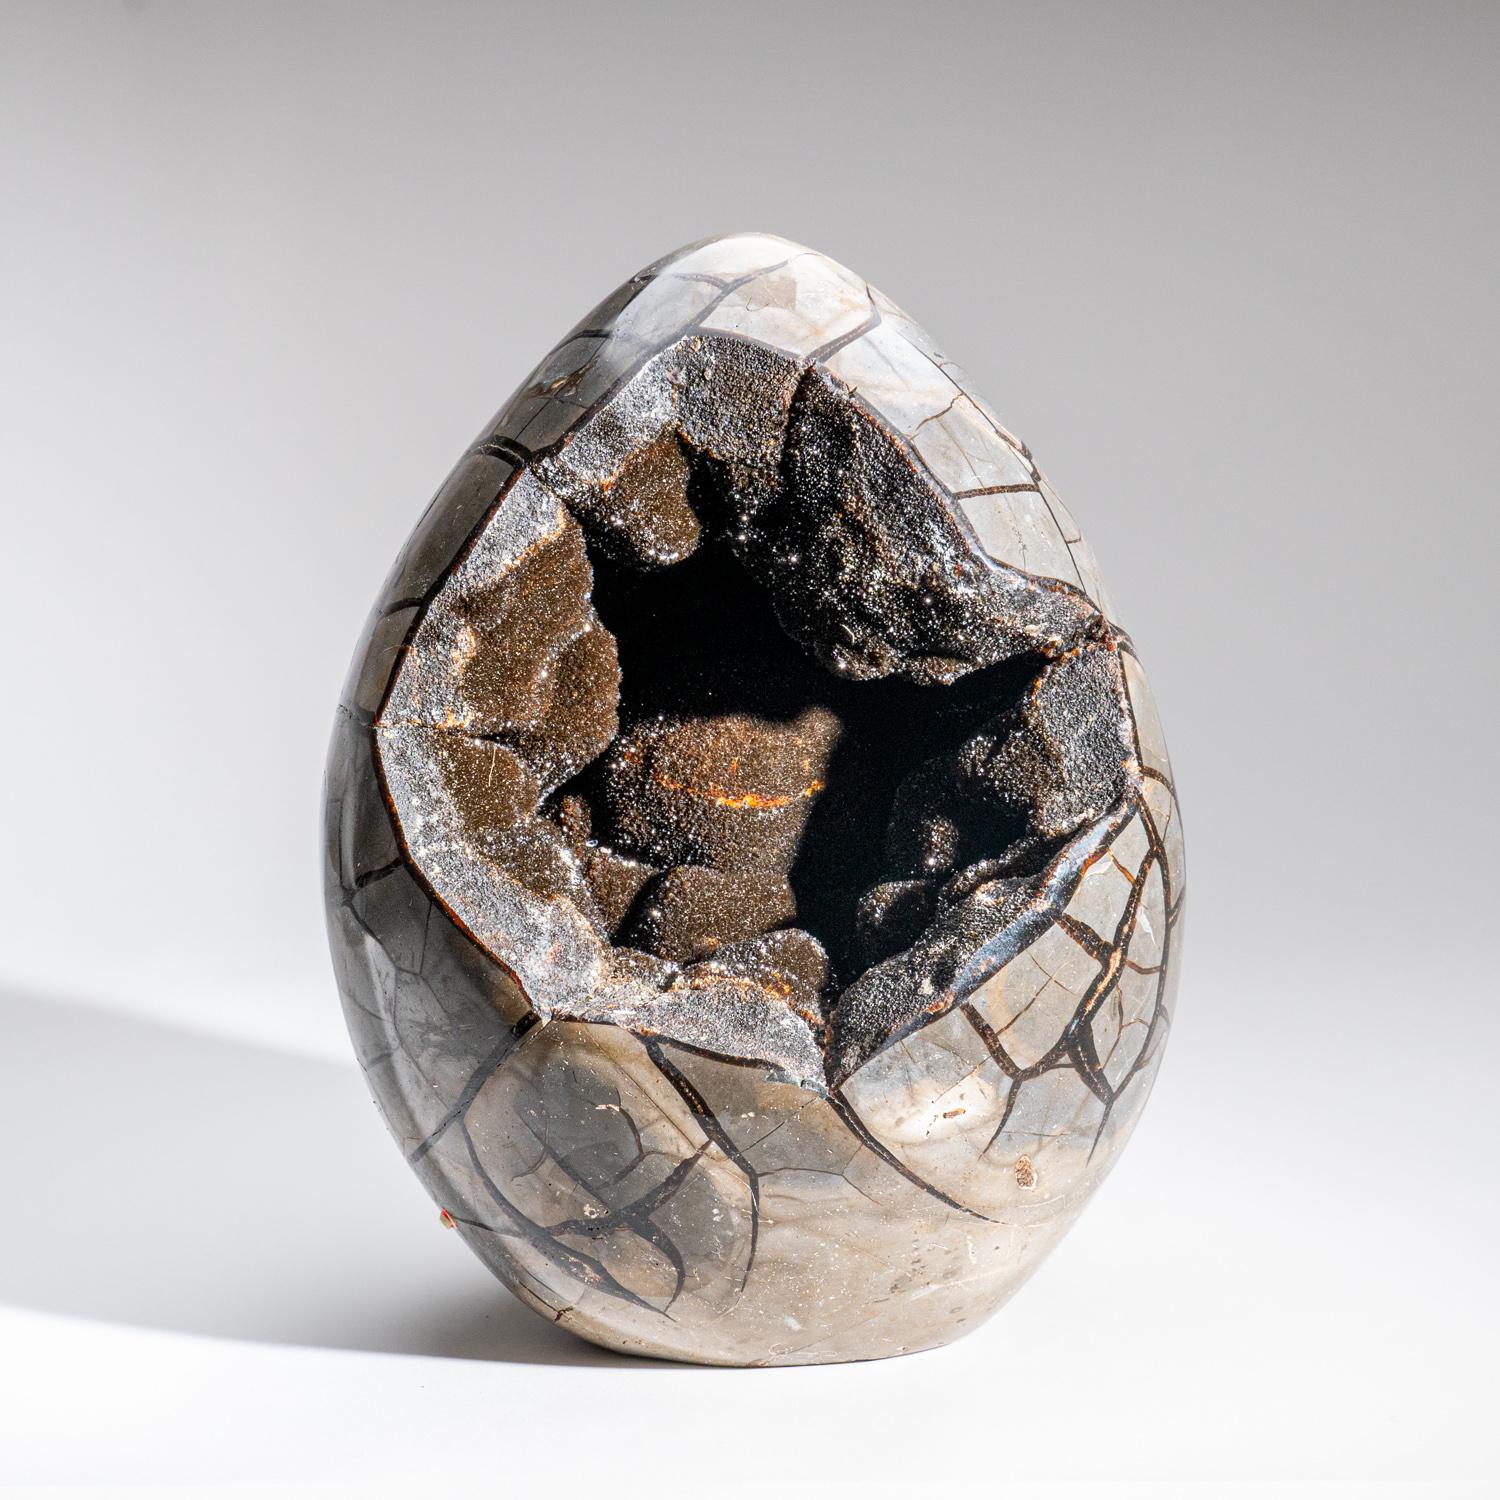 Malagasy Polished Septarian Druzy Geode Egg from Madagascar (30 lbs) For Sale